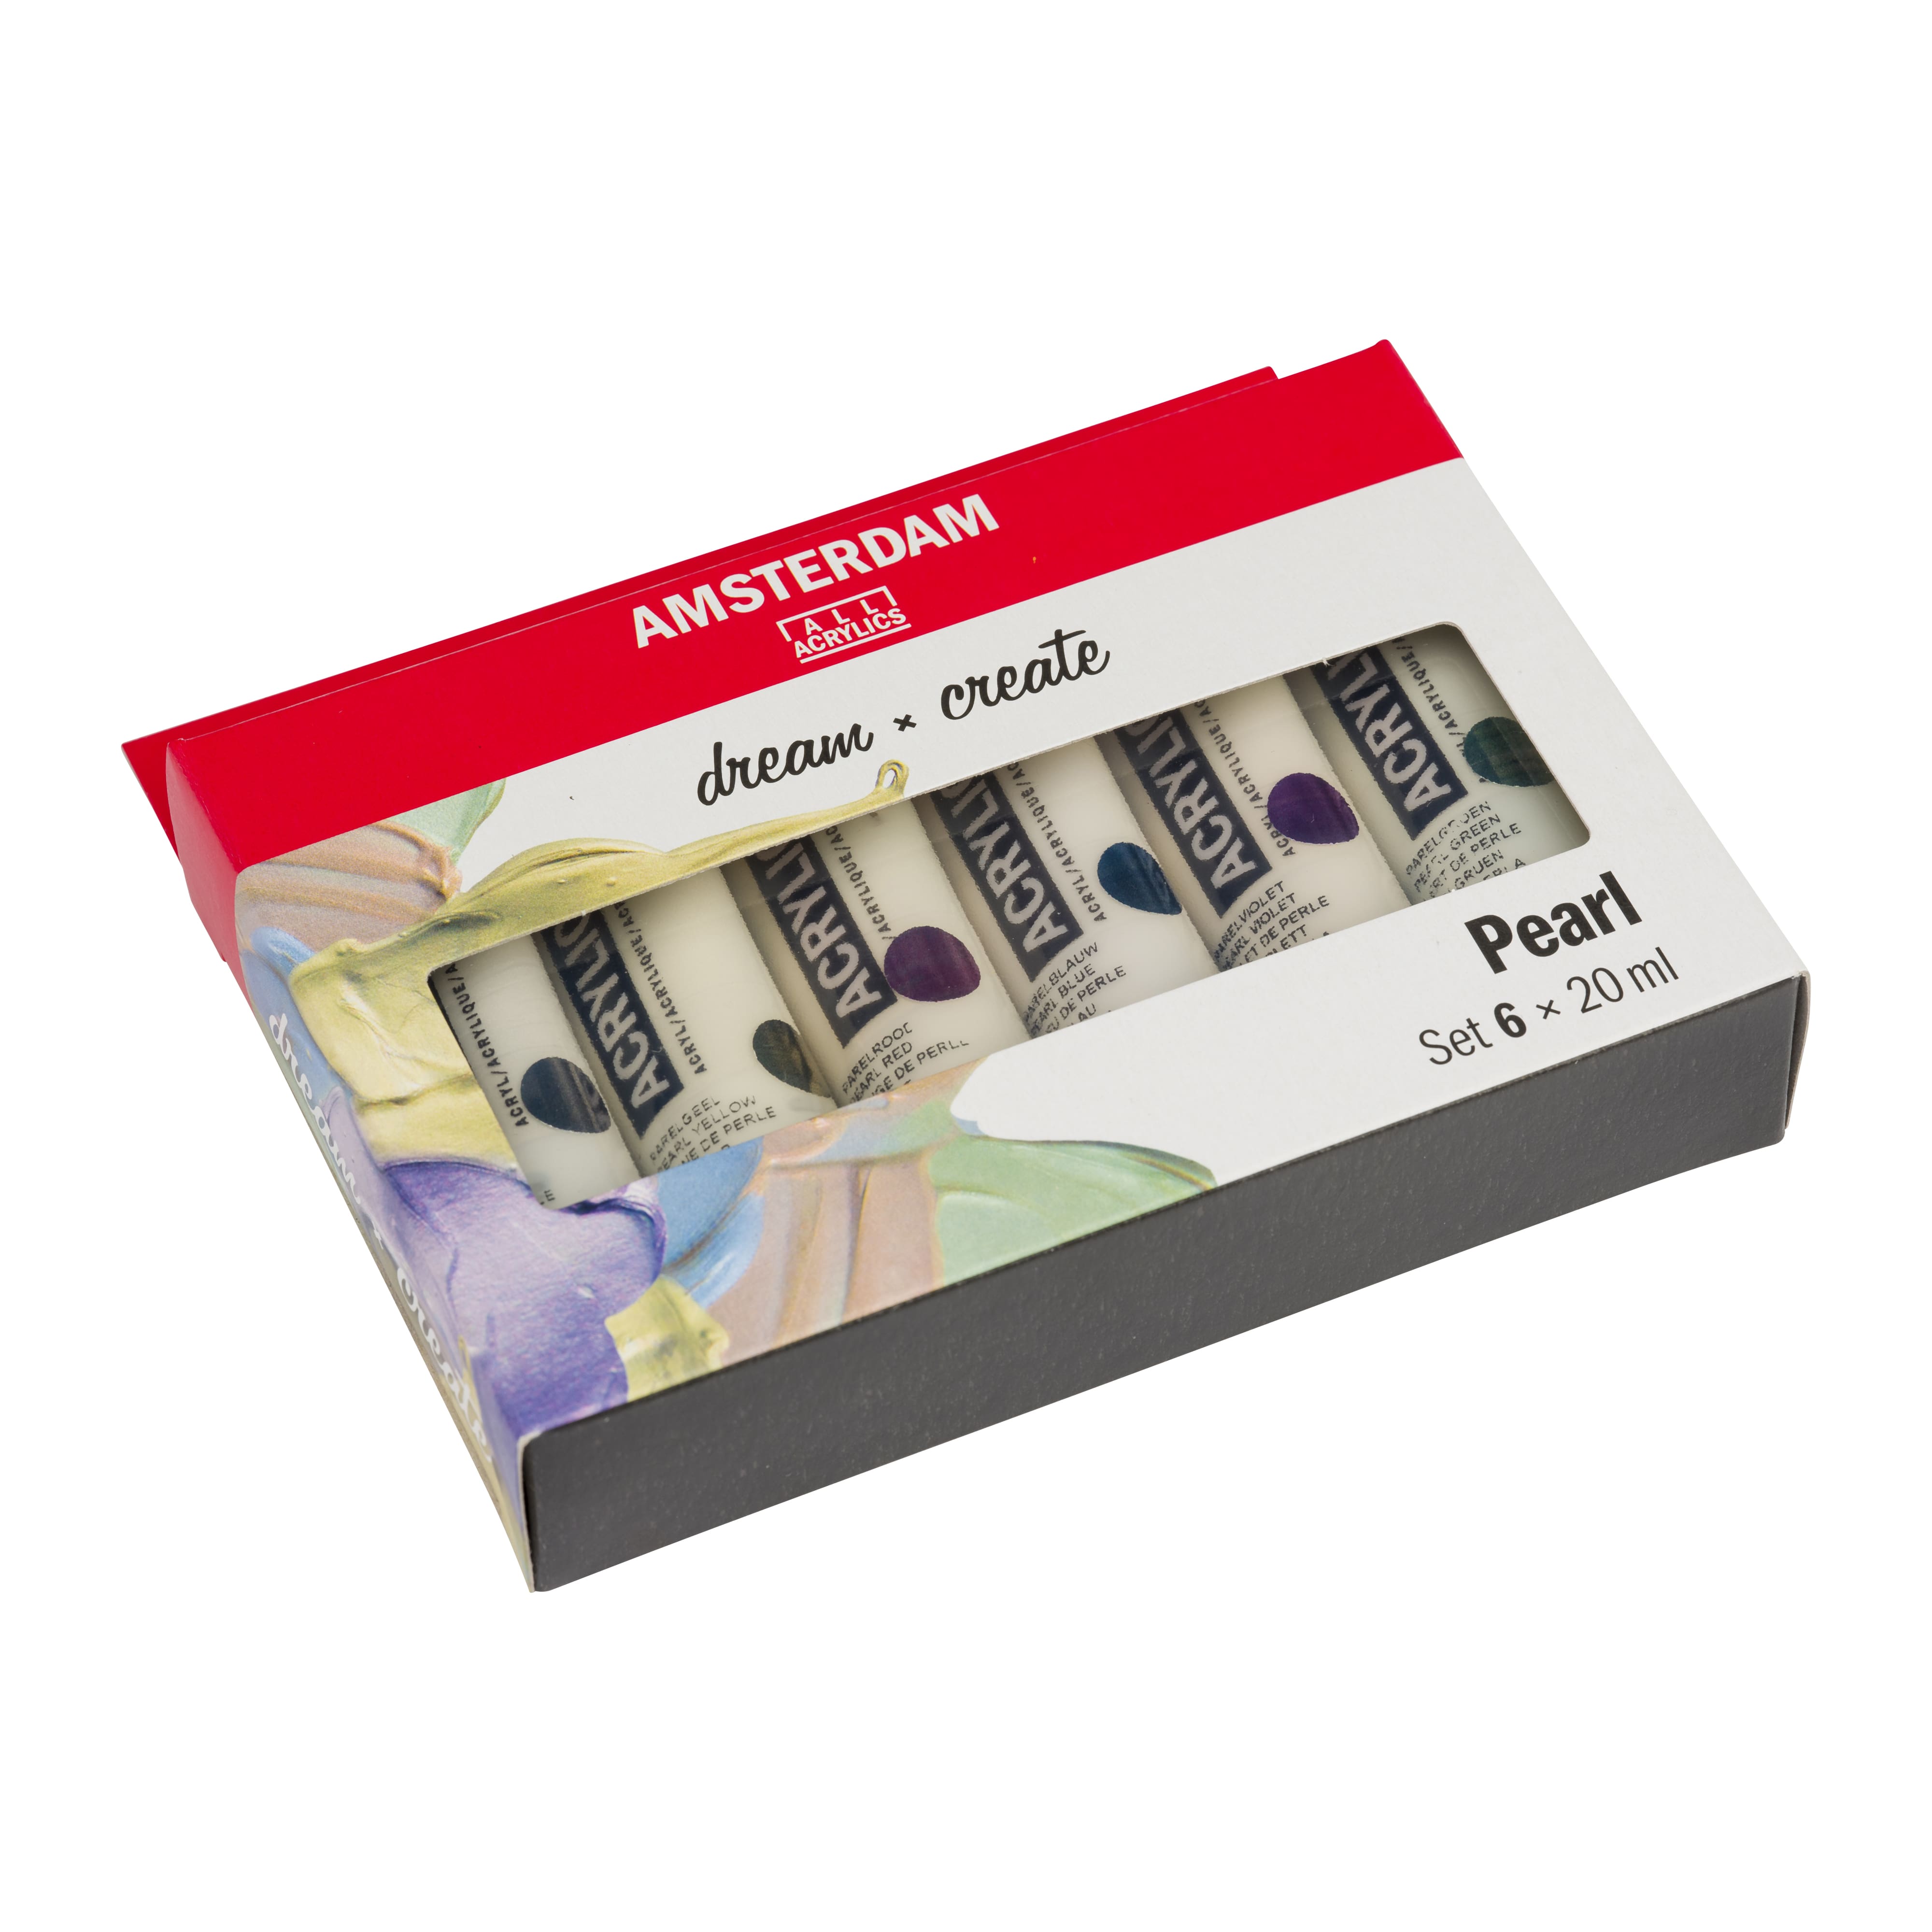 Amsterdam Standard Series 6 Color Pearl Acrylic Paint Set